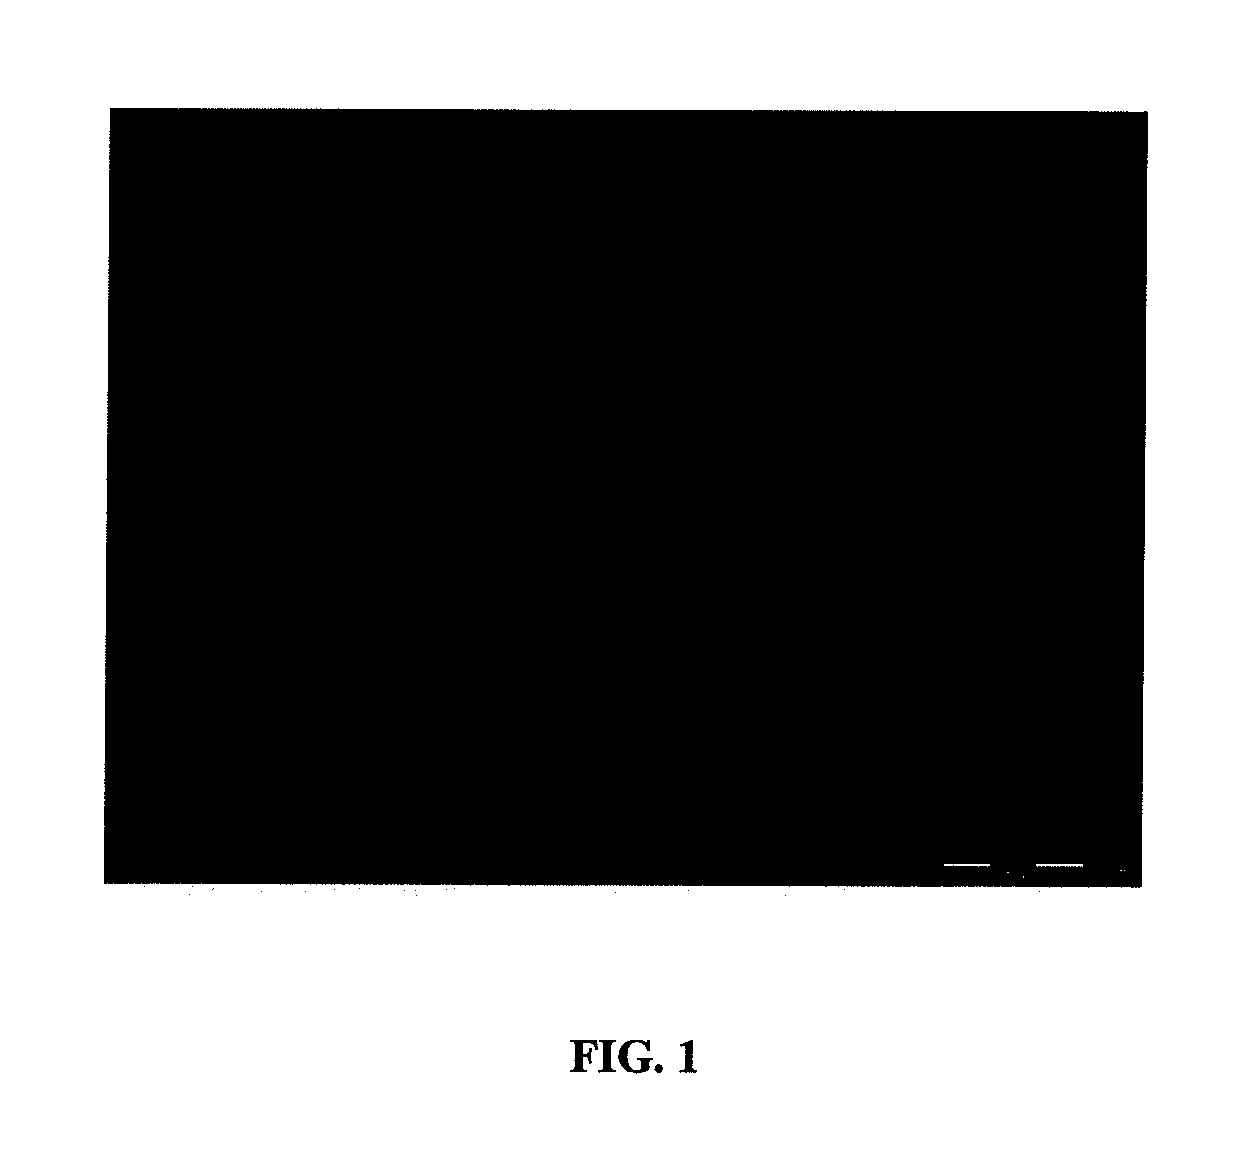 Methods for embryonic stem cell culture